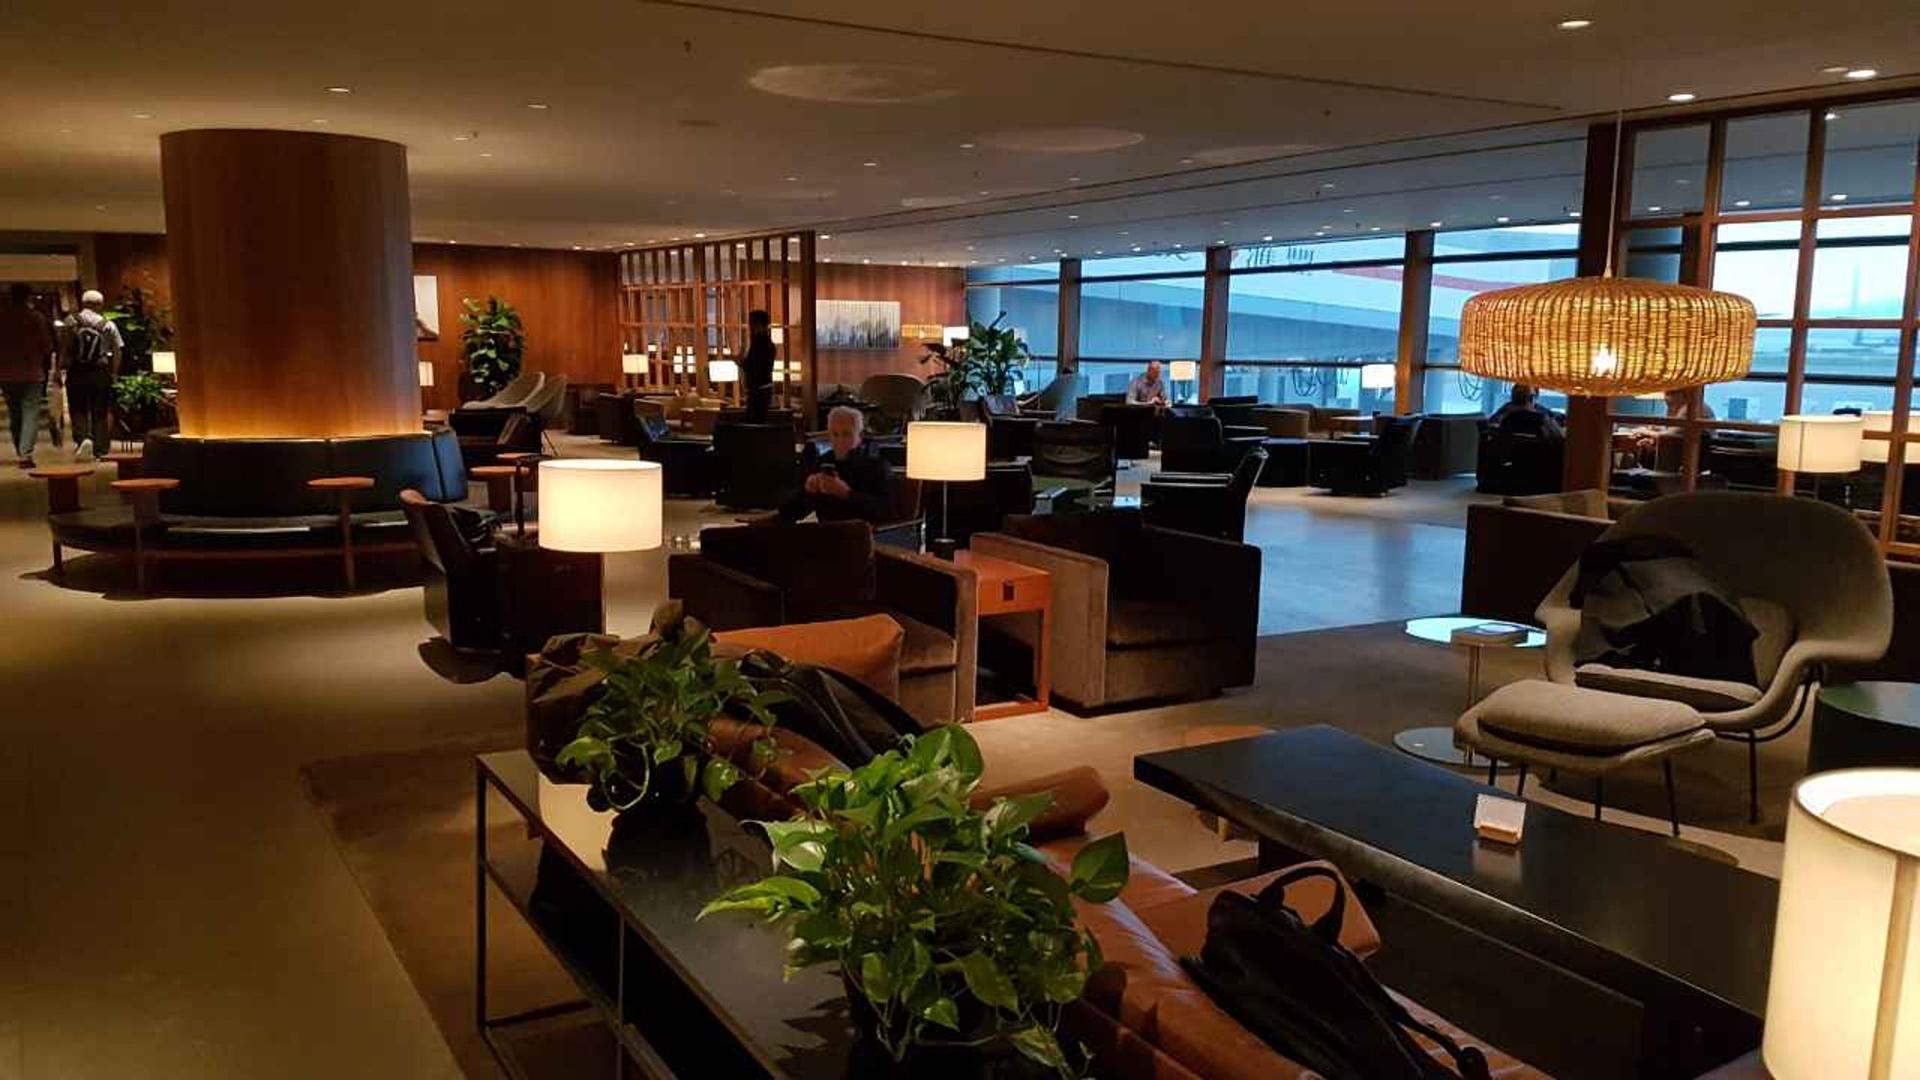 Cathay Pacific The Pier Business Class Lounge image 26 of 61